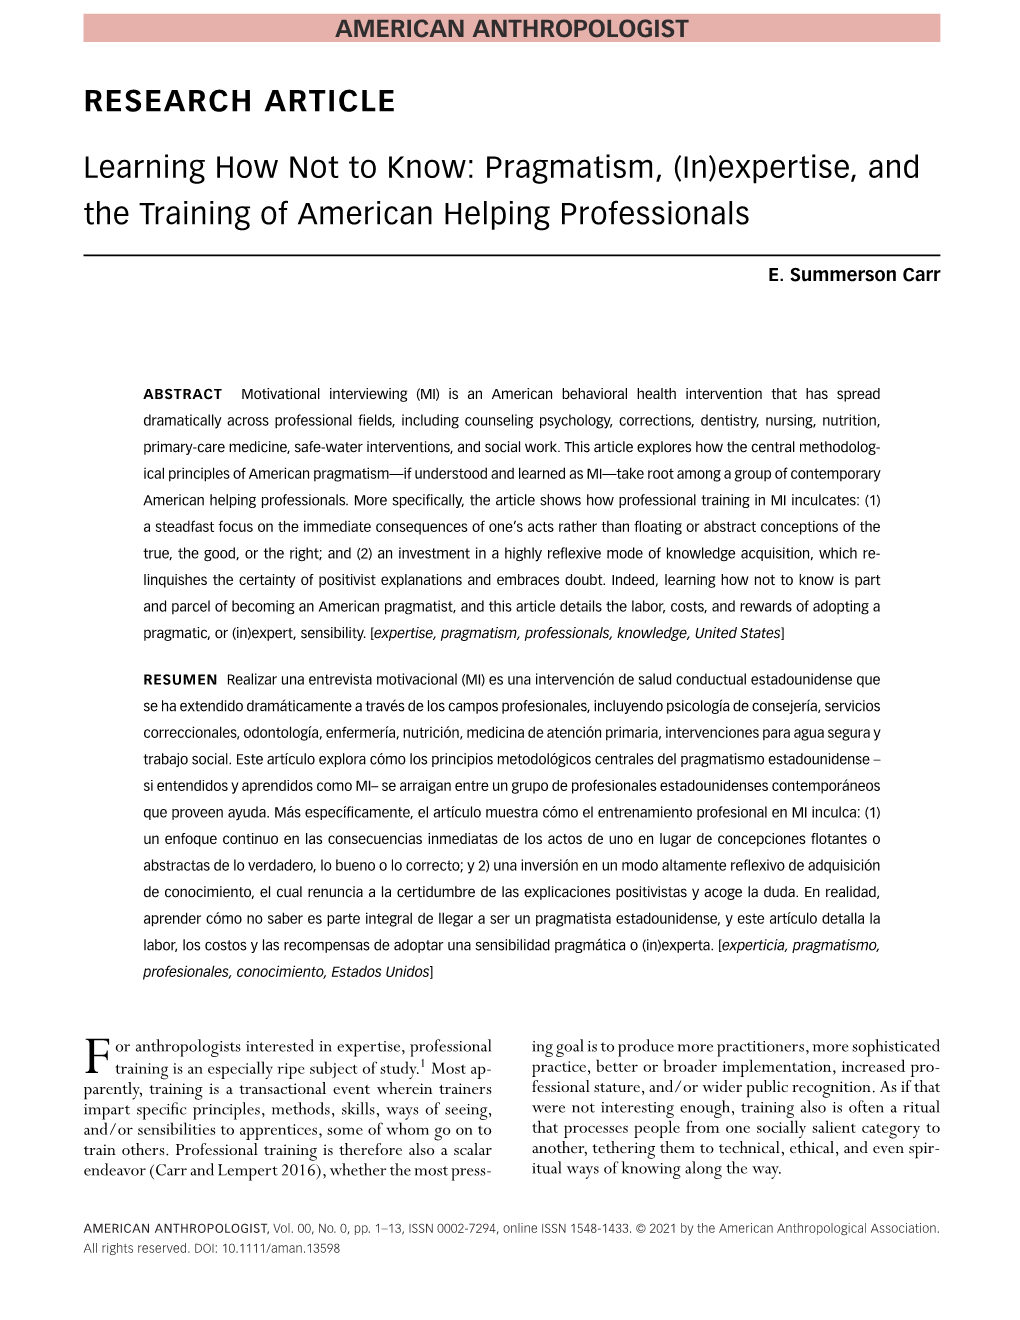 Pragmatism, (In)Expertise, and the Training of American Helping Professionals